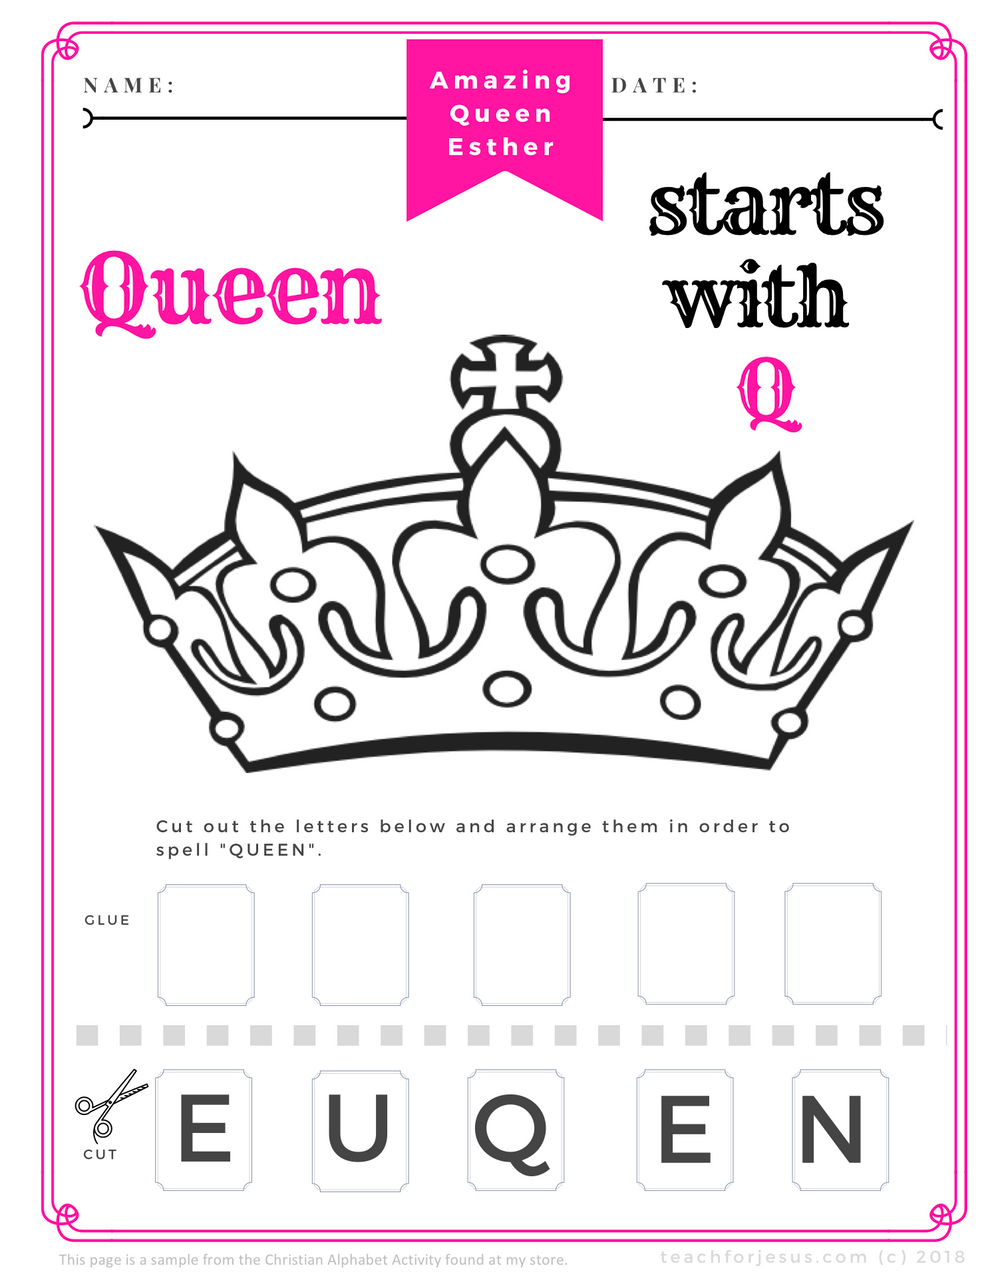 Queen Esther Printables - Printable World Holiday